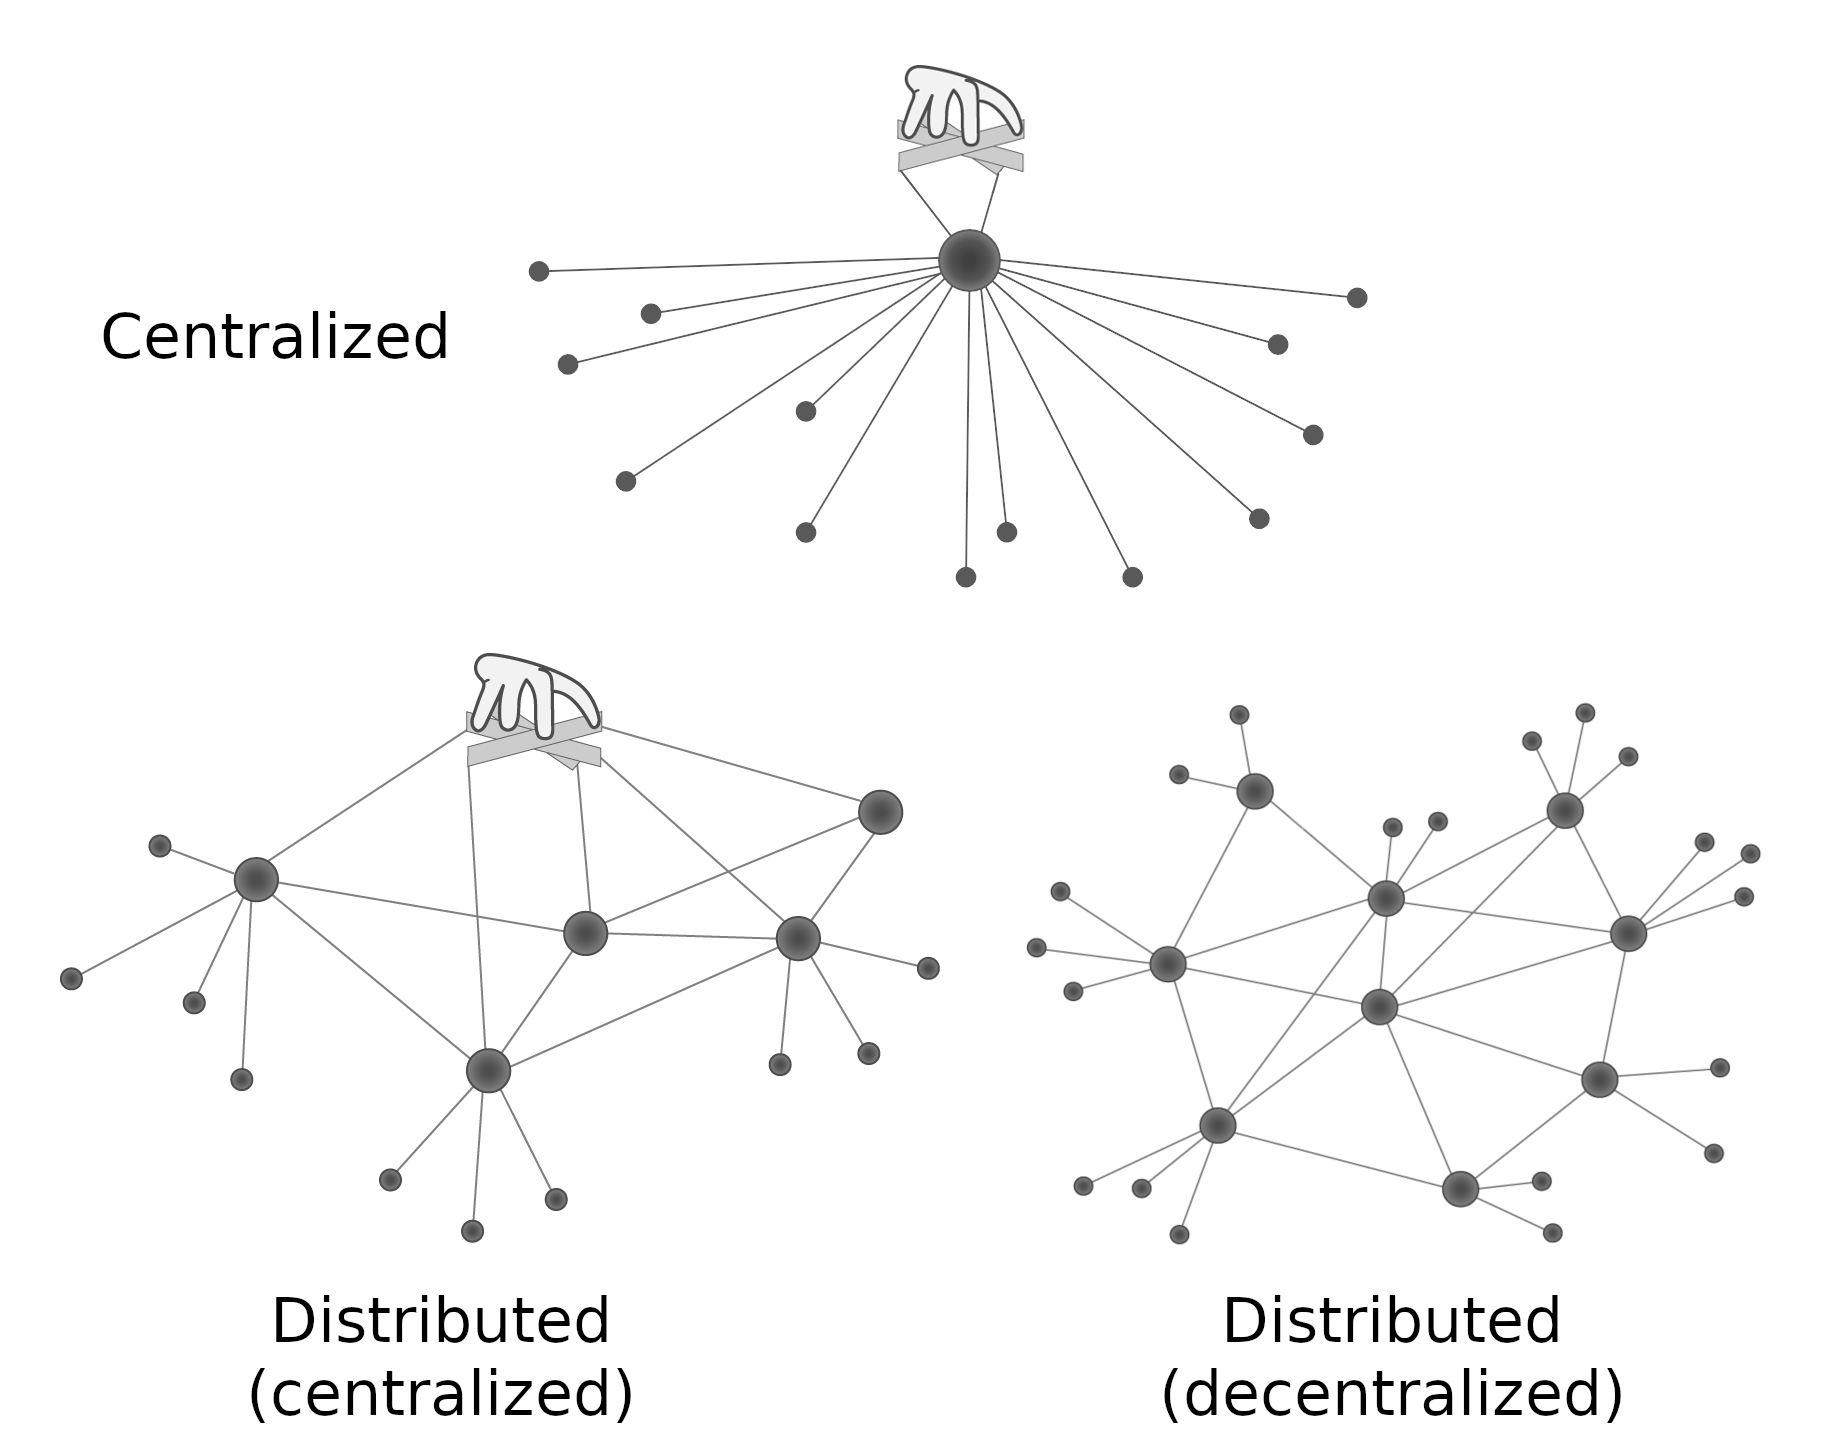 3 images depicting how distributed and decentralized networks vary